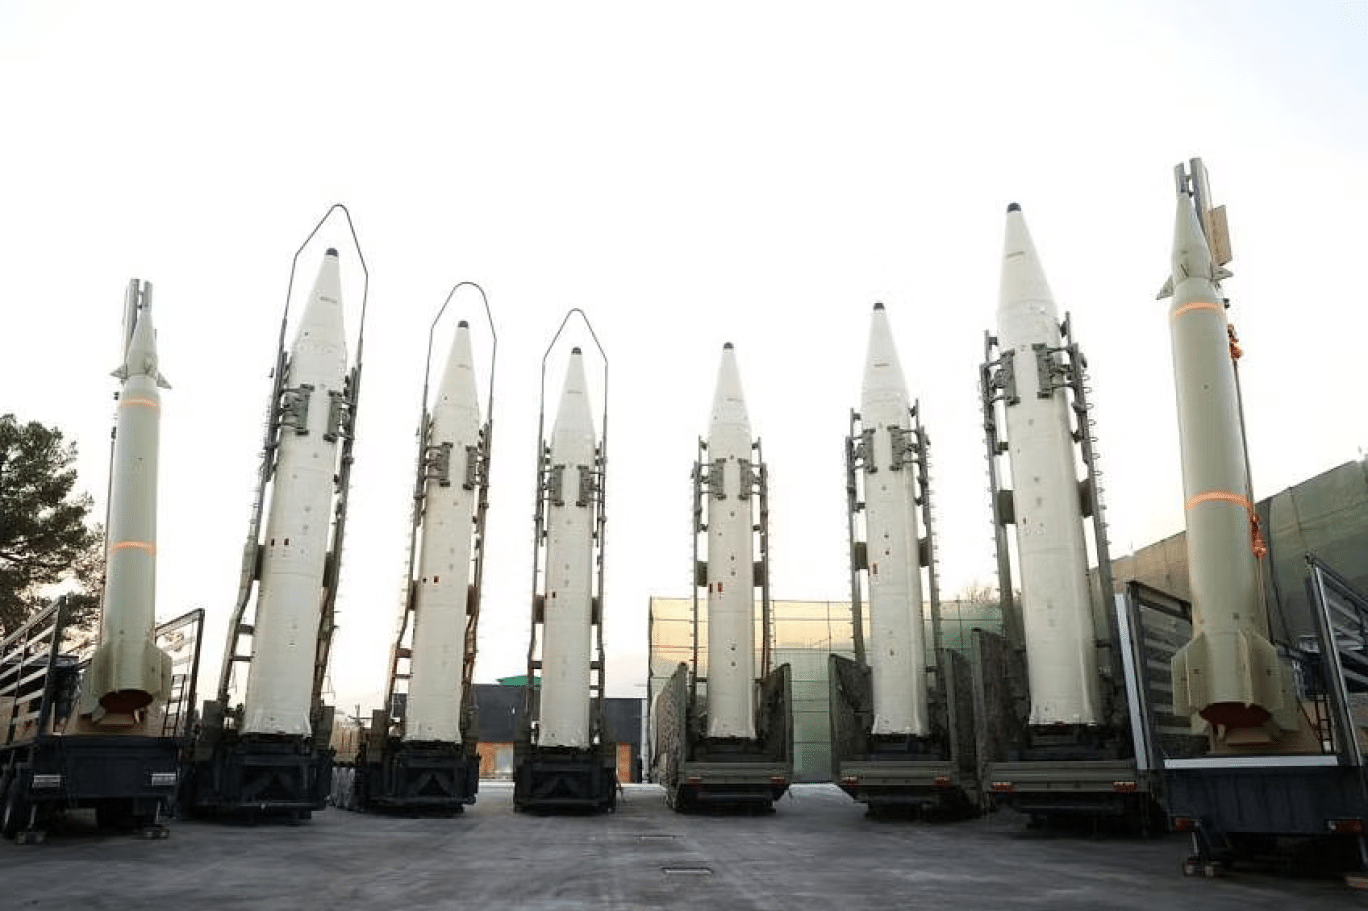 Purported Iranian-made ballistic missiles